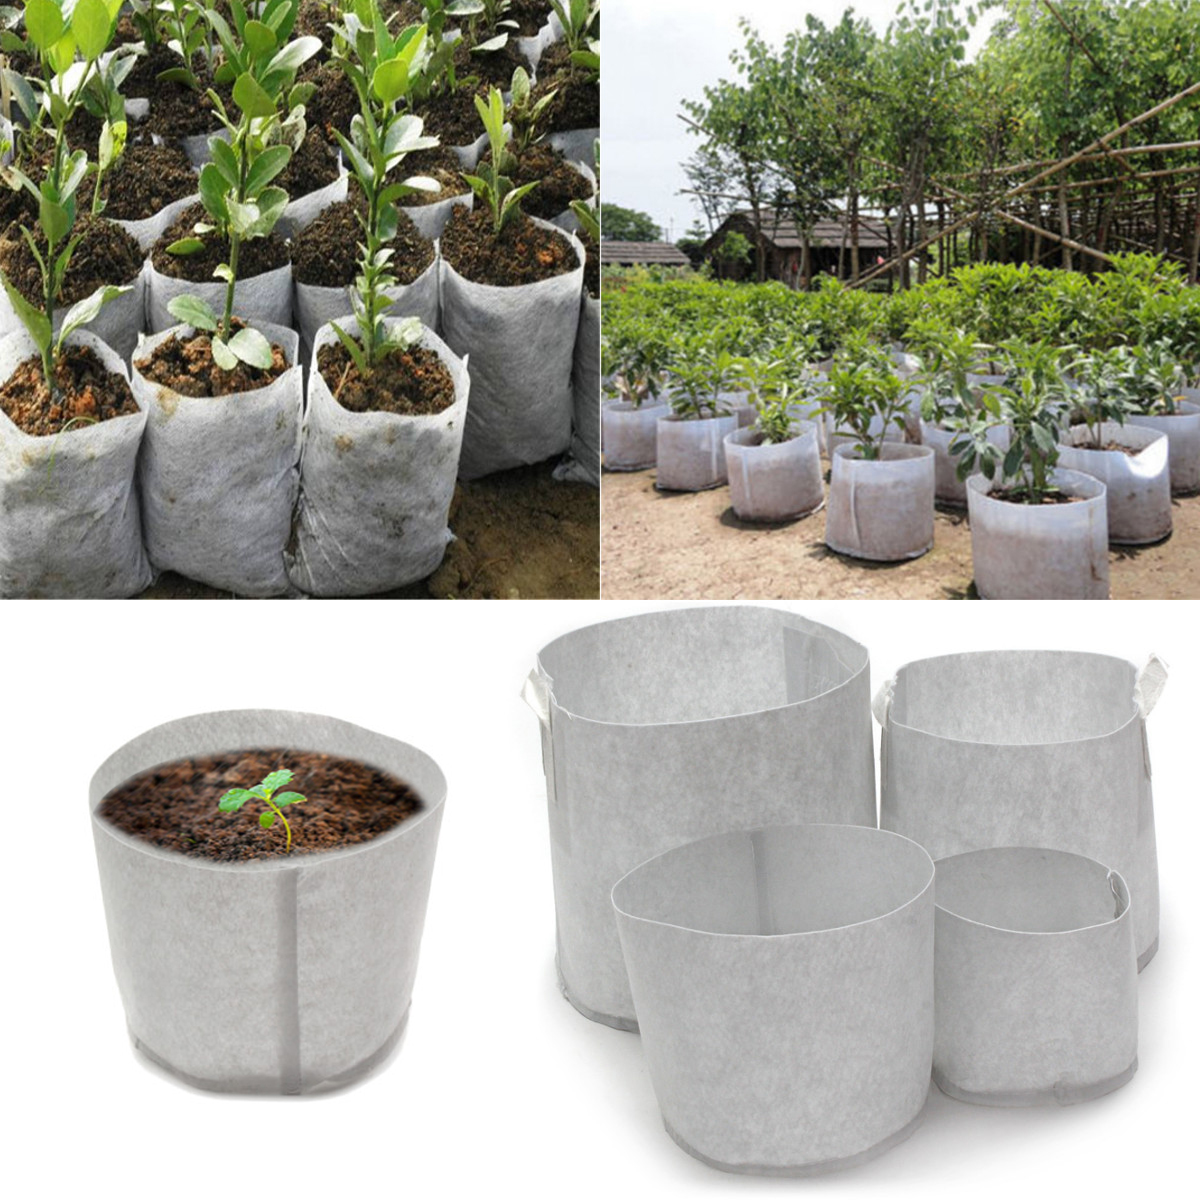 10Pcs-Eco-Friendly-Round-Fabric-Pot-Planting-Pouch-Root-Grow-Aeration-Container-Seedling-Bag-Box-1172091-1